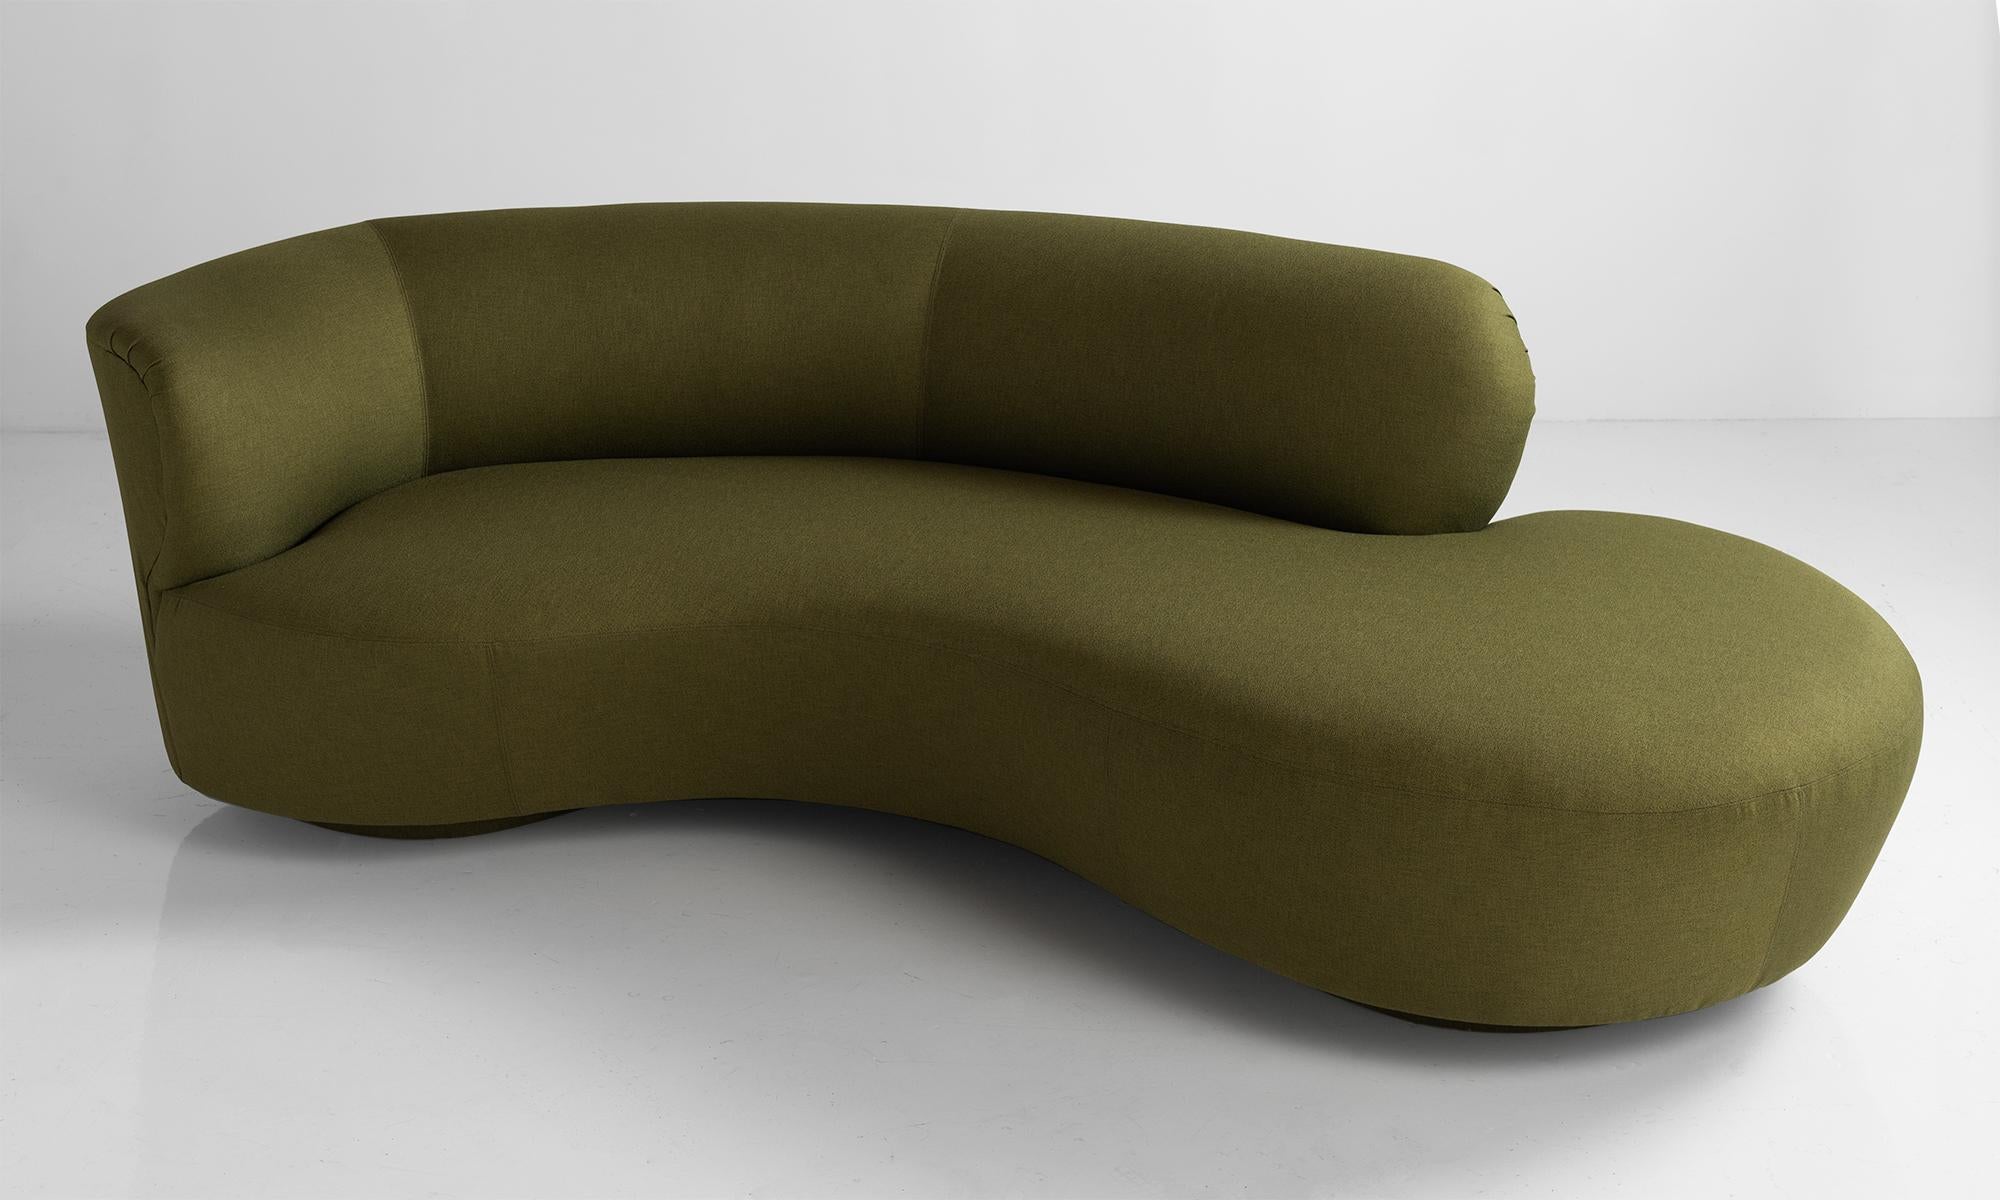 Serpentine sofa by Vladimir Kagan, America, circa 1970

Iconic form, newly reupholstered in Maharam polyester fabric.